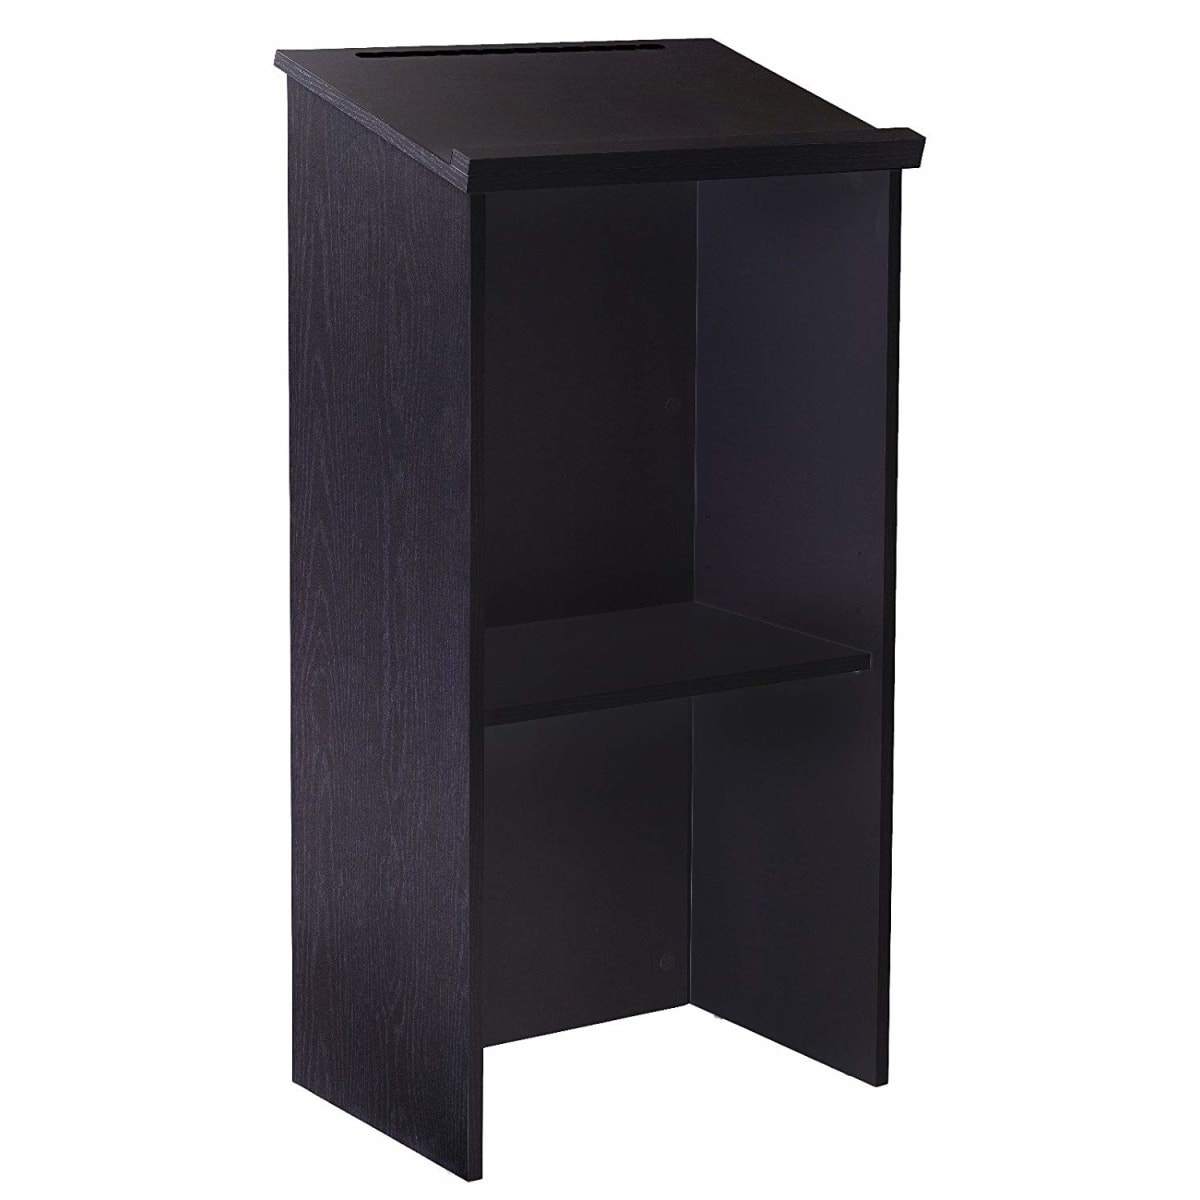 AdirOffice 661-01 Mahogany Stand up Podium with Adjustable Shelf for sale online 